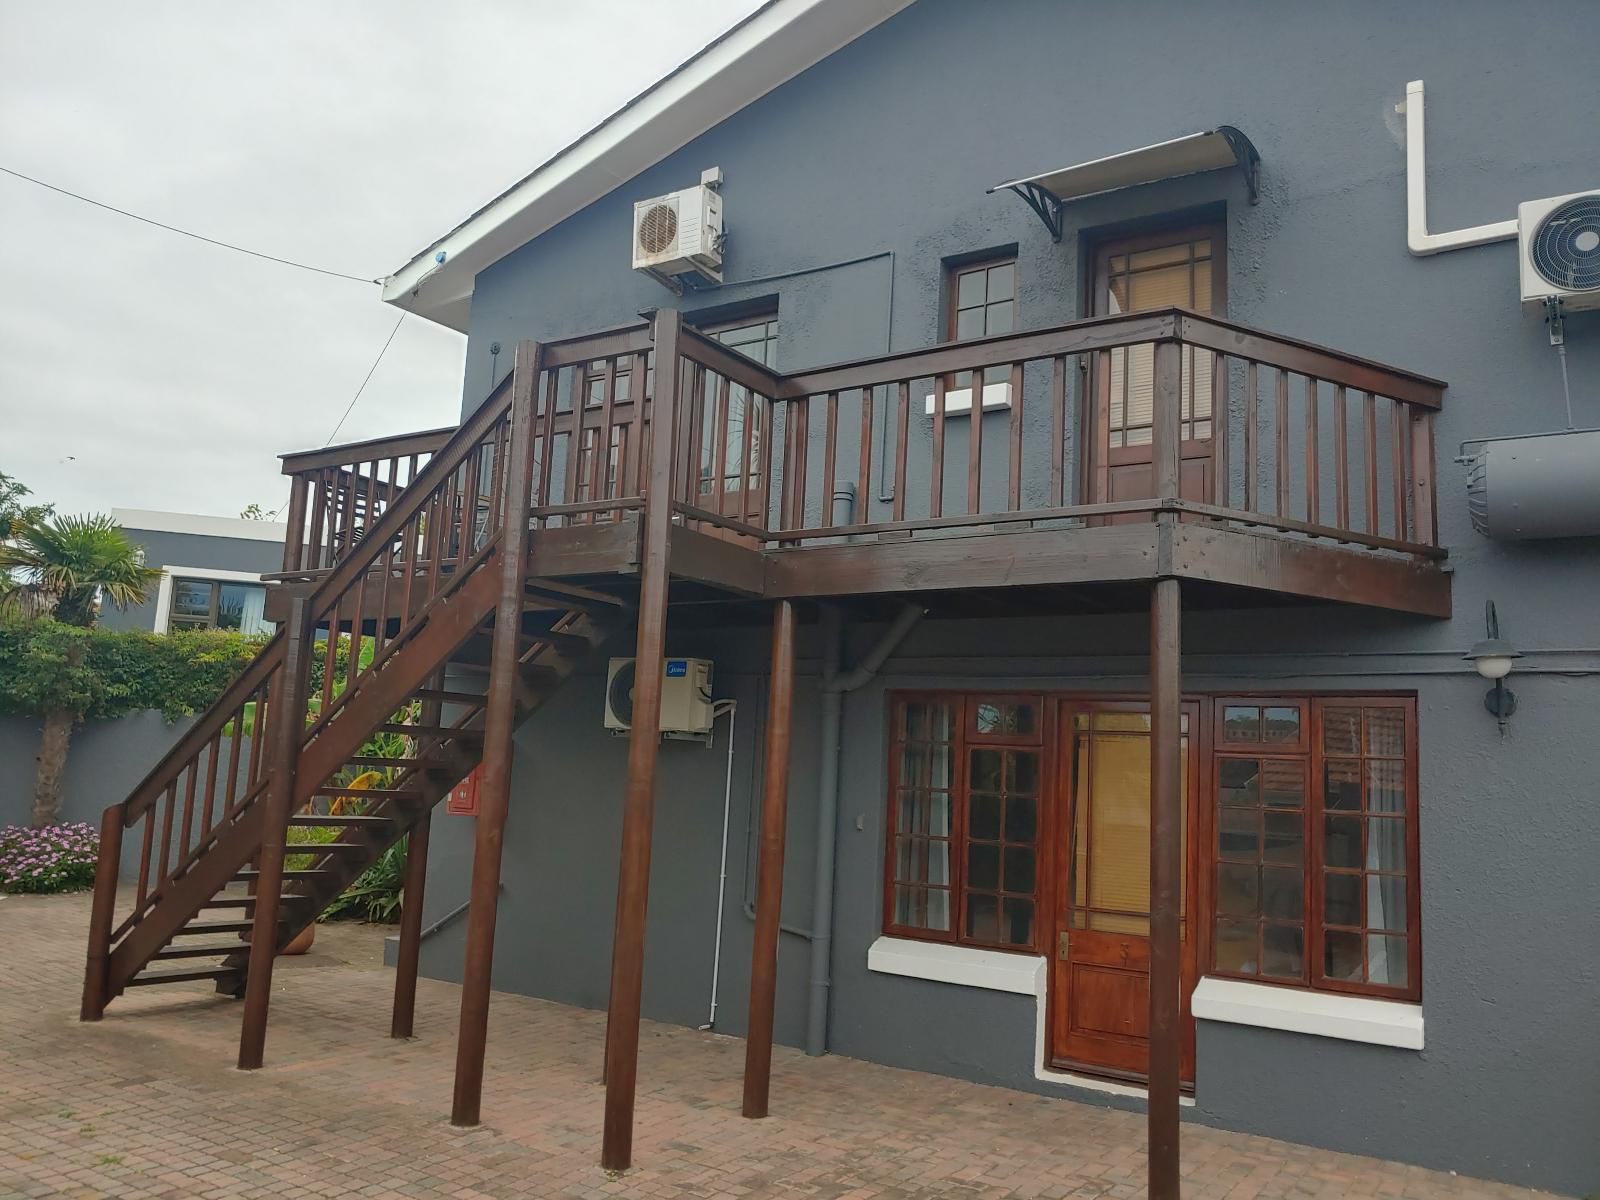 Boutique Hotel On The Bay Humewood Port Elizabeth Eastern Cape South Africa Unsaturated, House, Building, Architecture